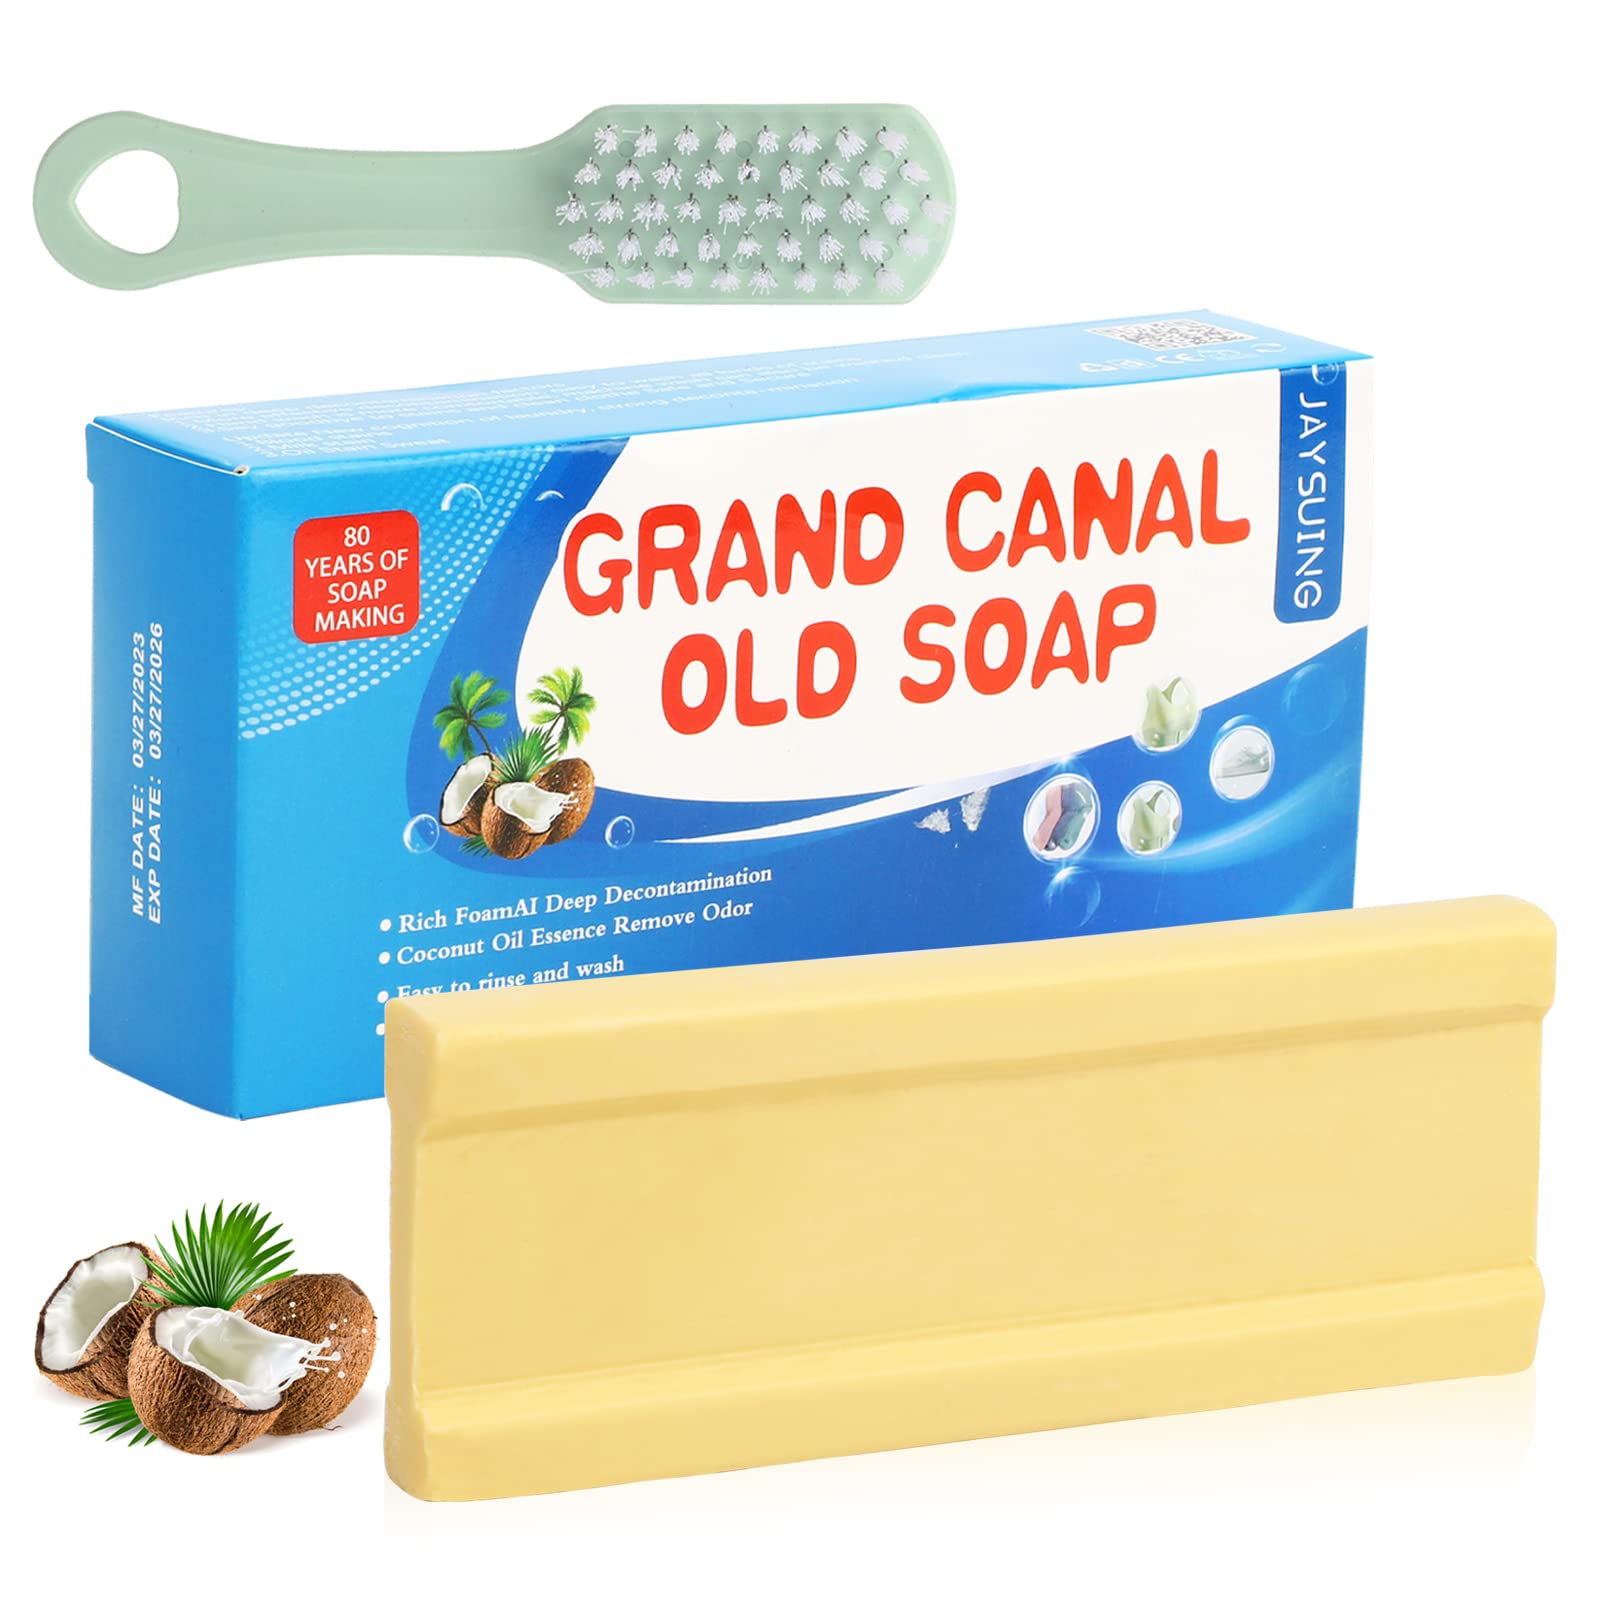 Grand Canal Old Soap & Brush Powerful Stain Remover Laundry Soap Bar  Non-Additivewhitening Underwear Cleaning Soap Suitable For All Clothing  Long-Lasting Fragrance for Hand Washing Clothes 1PCS(Soap + Brush)